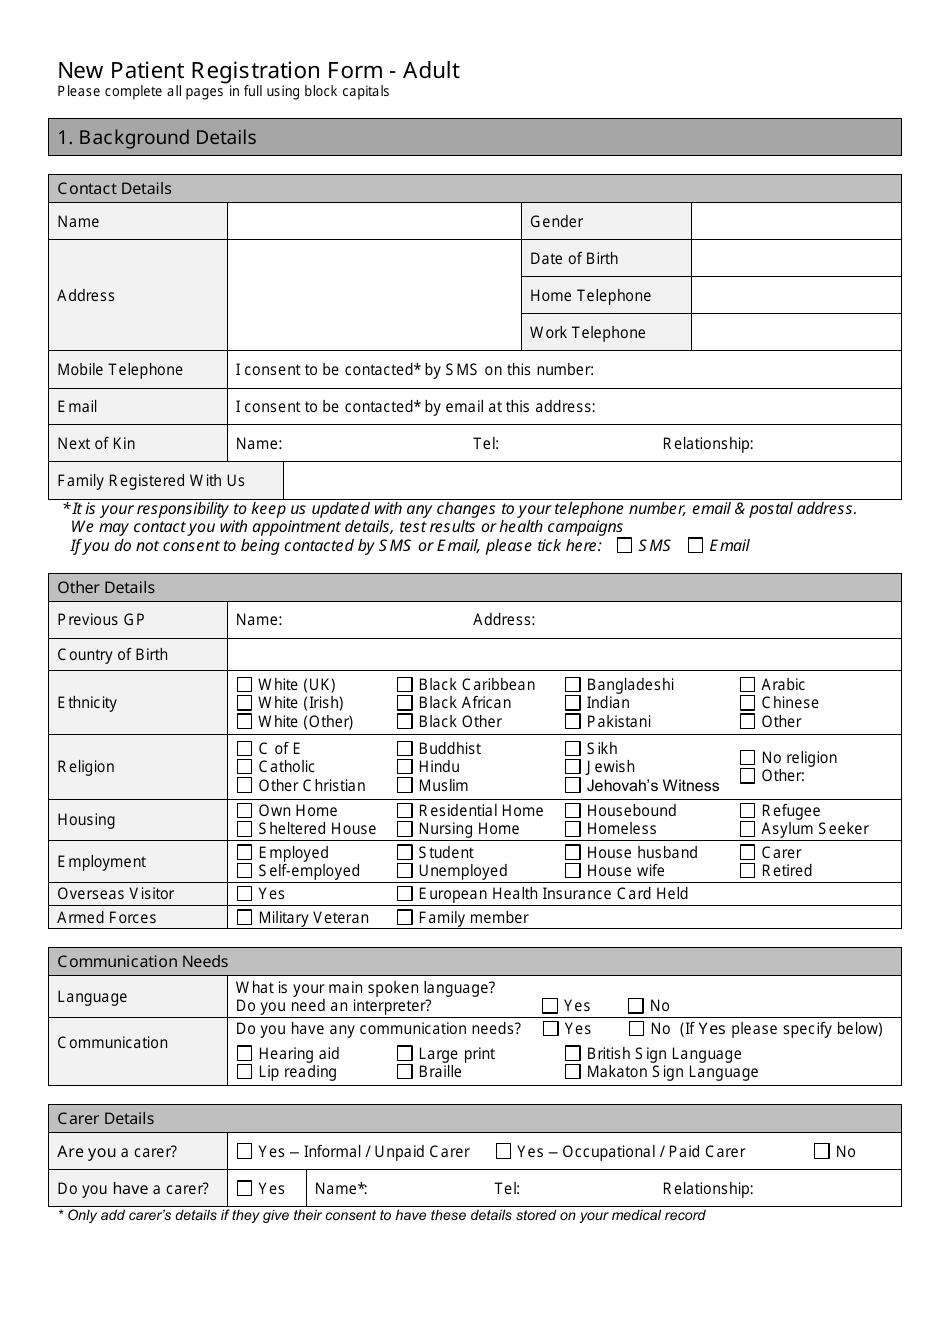 United Kingdom New Patient Registration Form - Adult - Fill Out, Sign ...